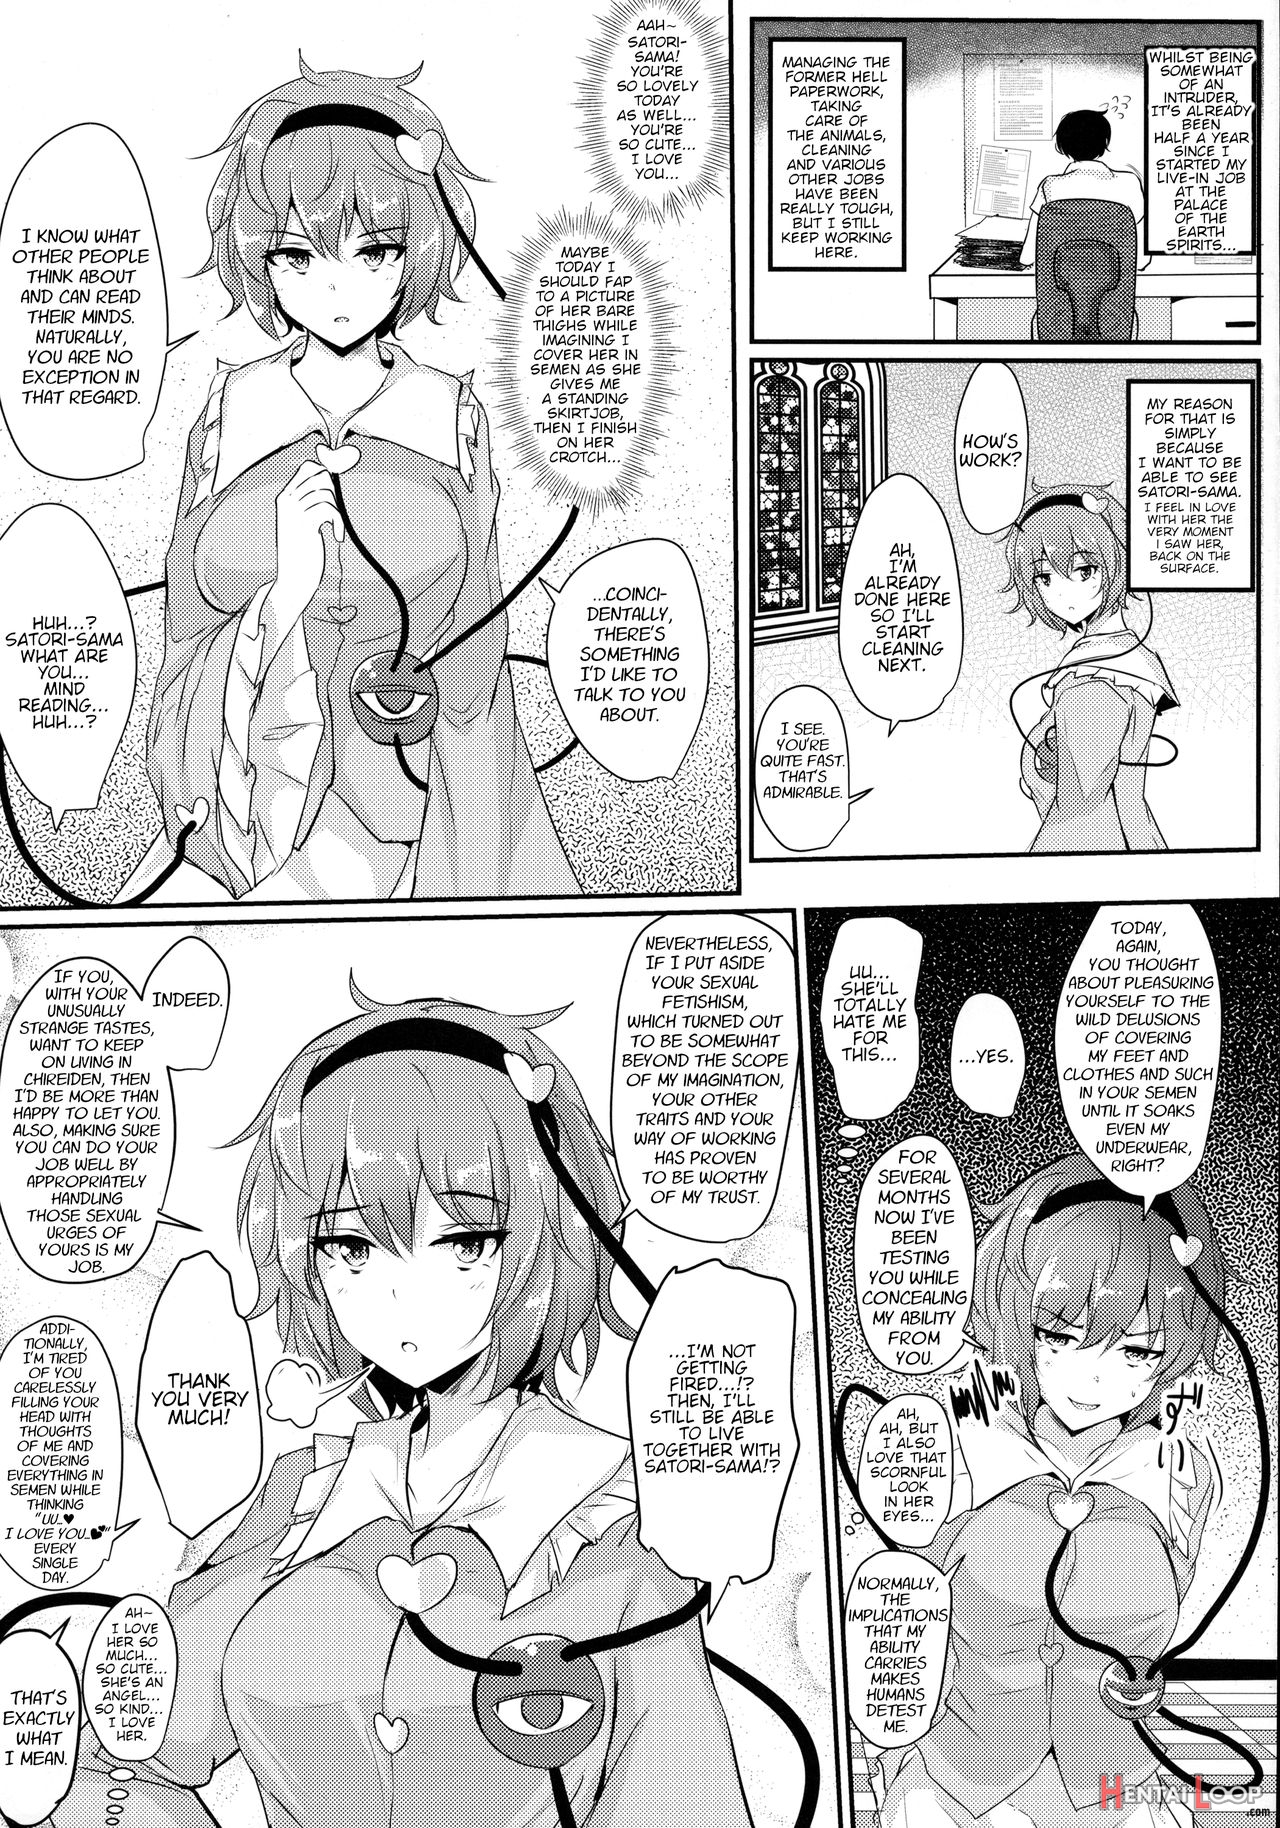 I Want To Be Watched By Satori-sama page 4